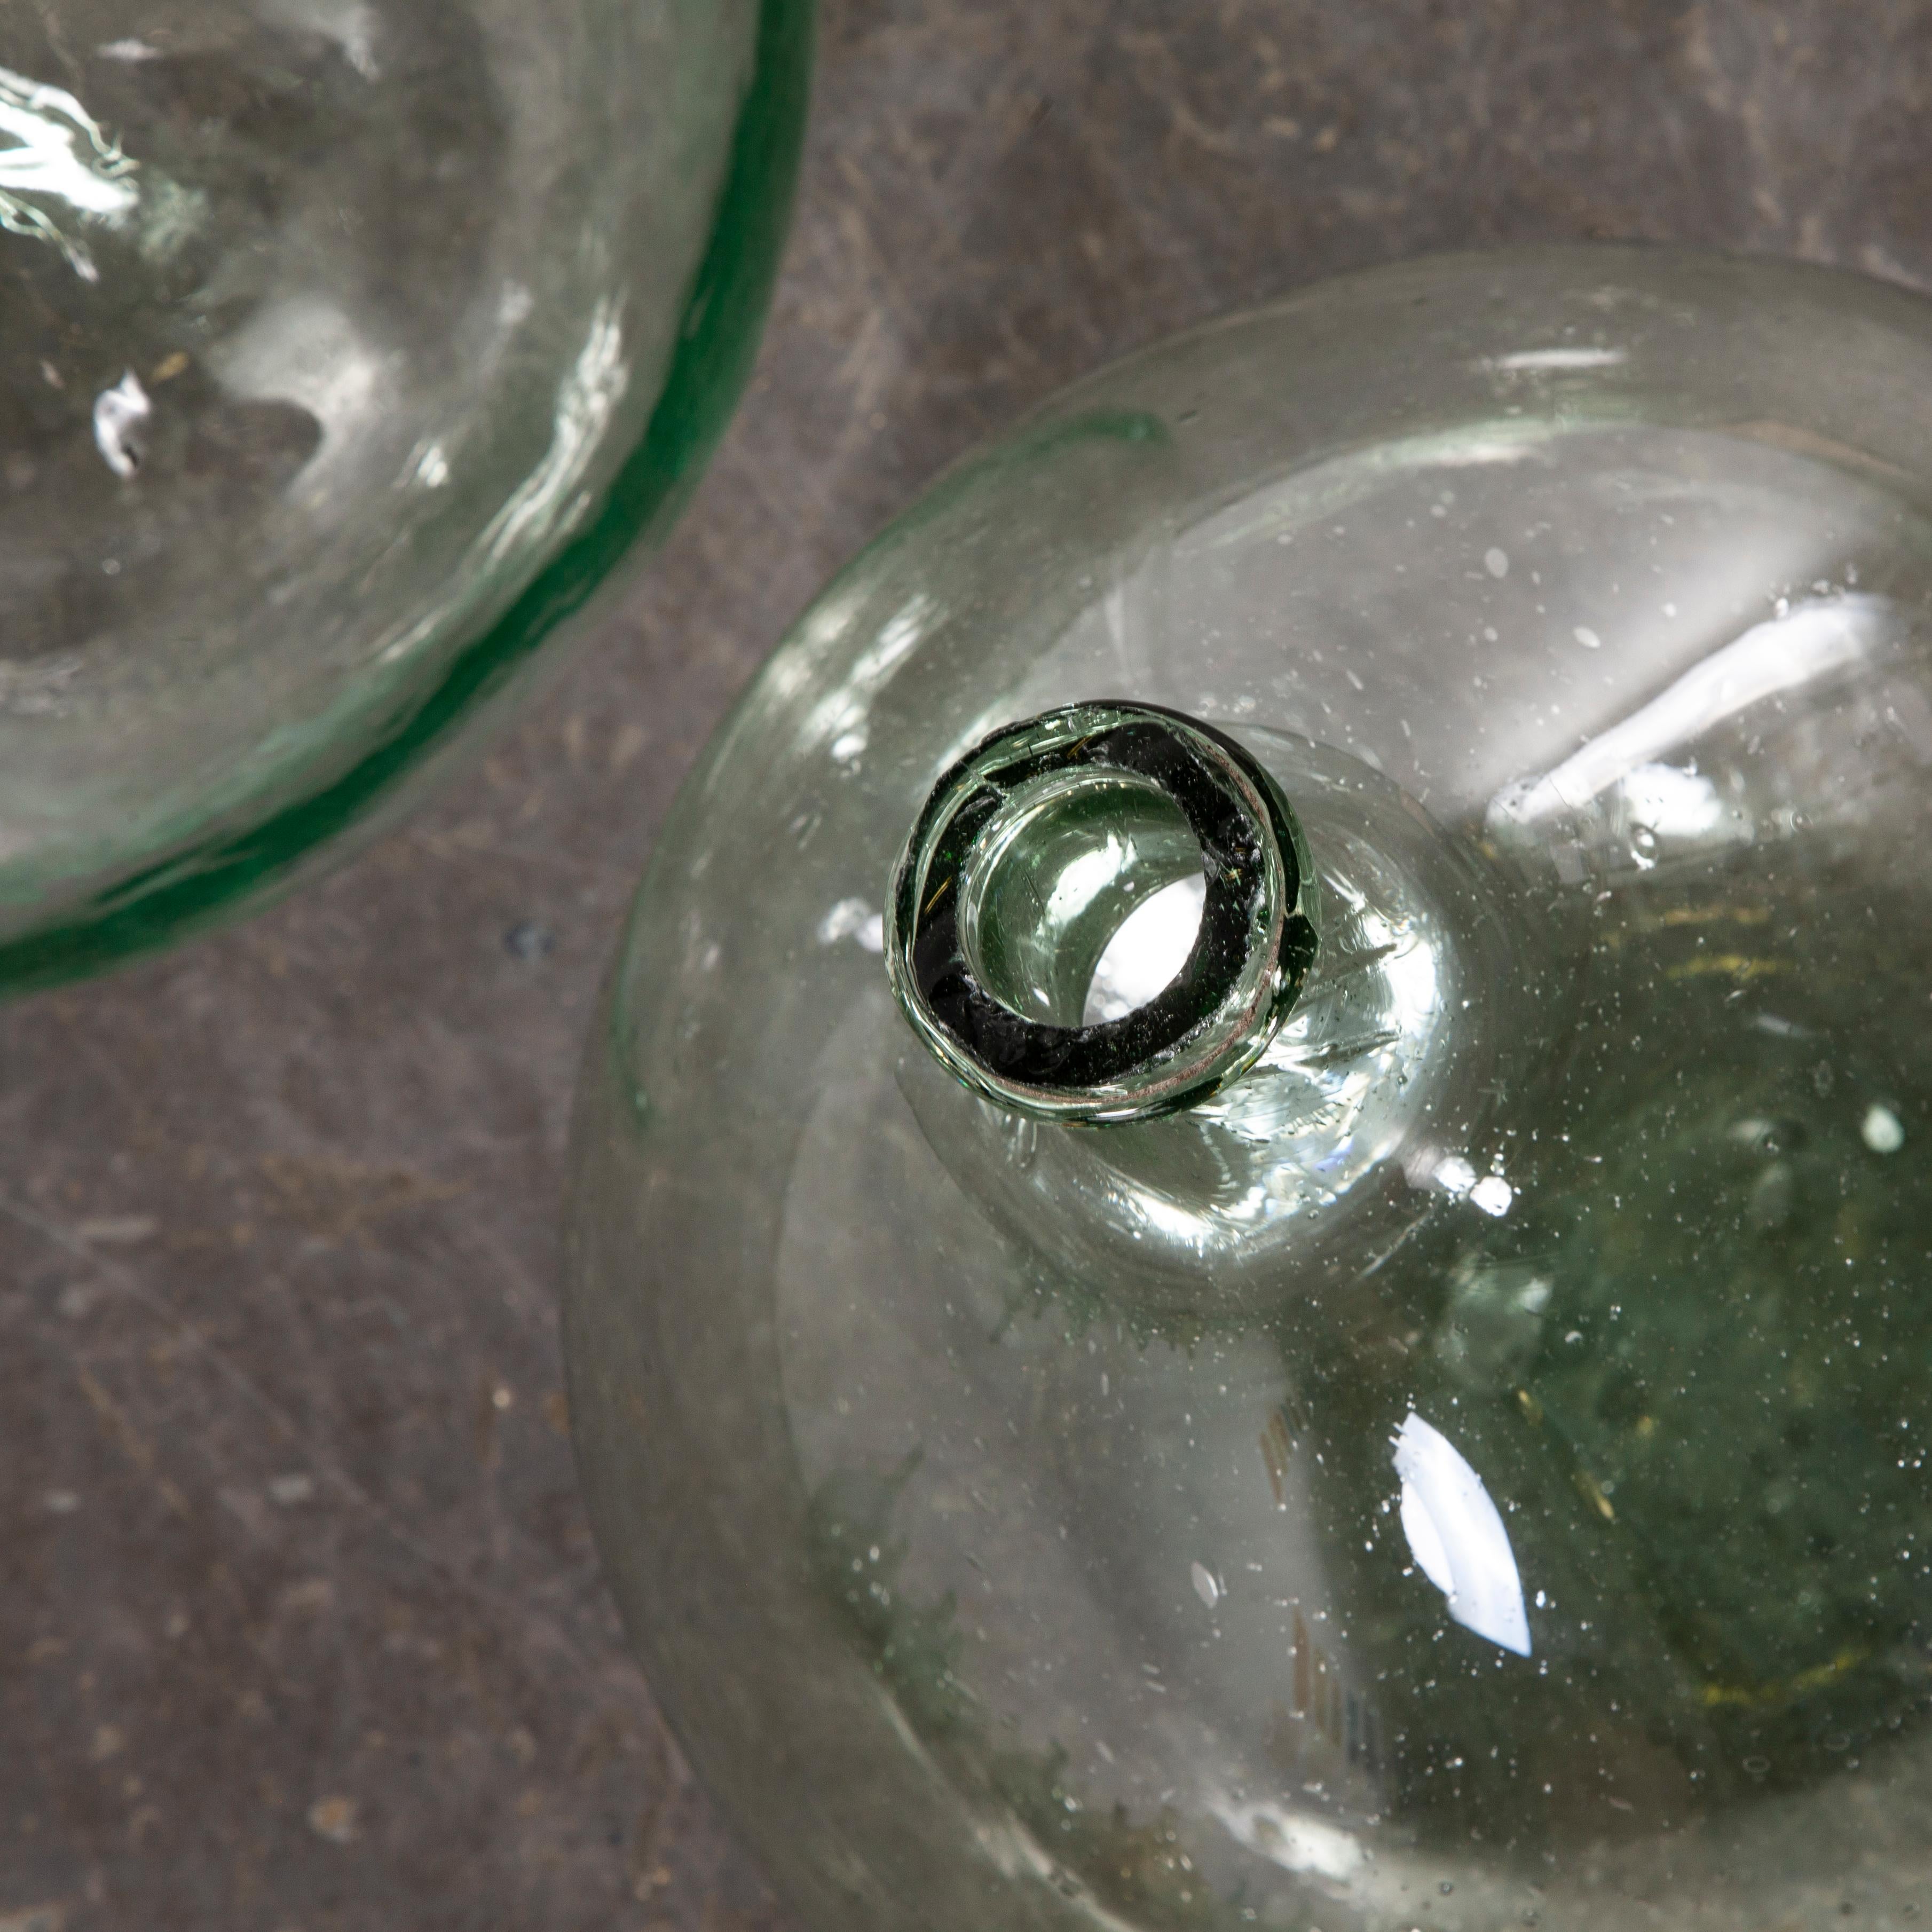 Vintage French Glass Demijohn – Pair of Demijohn (Model 957.14)

Vintage French Glass Demijohns. Pair of mouthblown glass demijohns used as a traditional containers mainly for wine storage and transport. Our demijohns have been carefully cleaned.